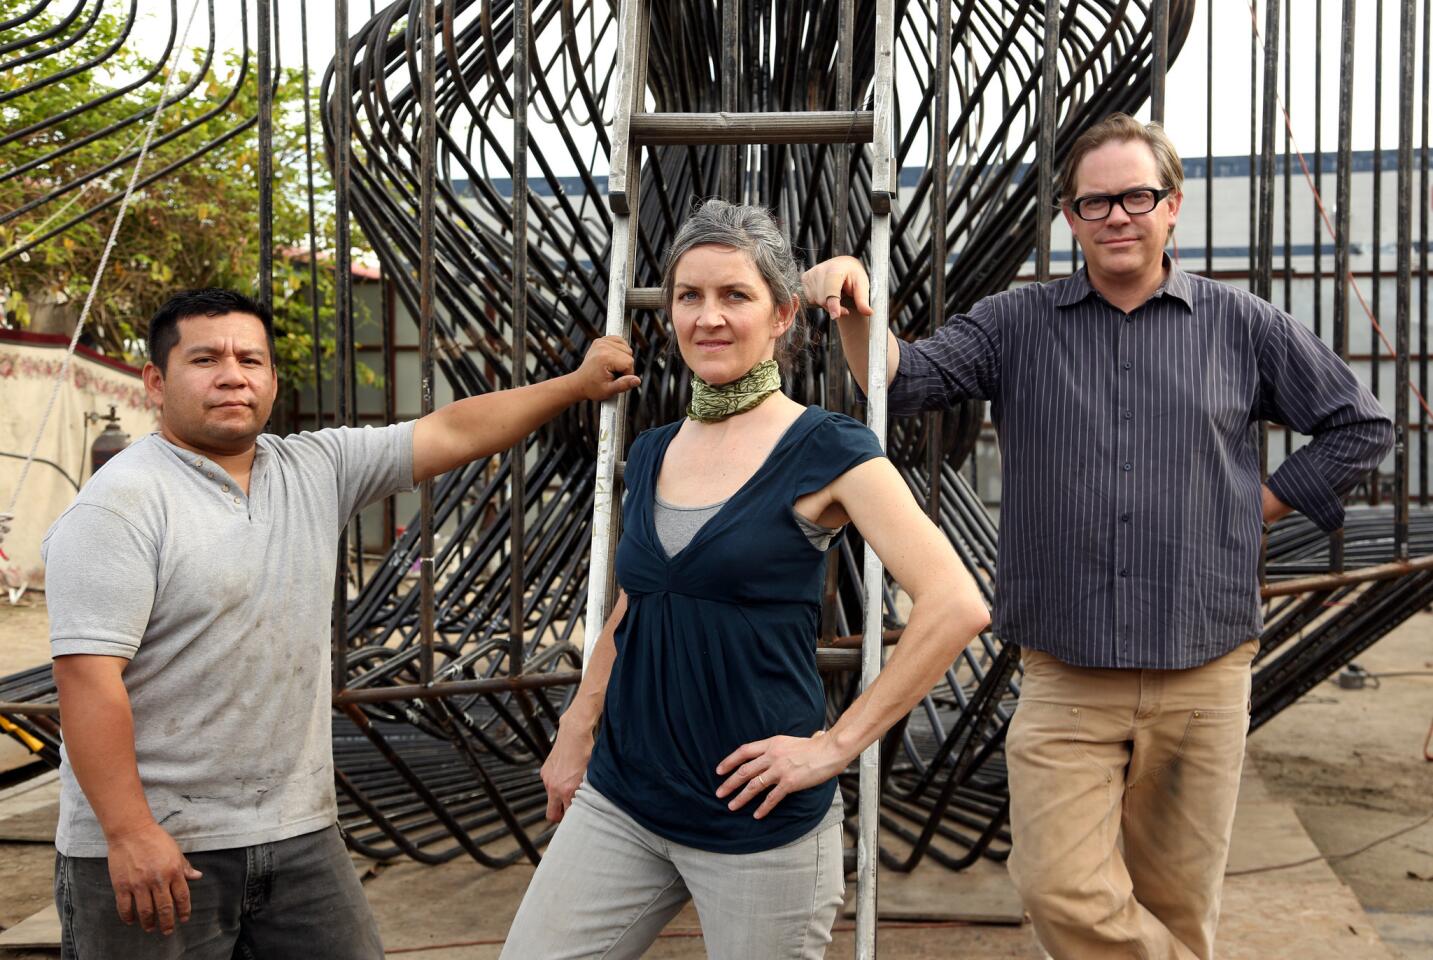 Lead welder Edwin Ramirez, left, artist Jenna Didier and architect Warren Techentin stand in front of "La Cage aux Folles," a work in progress that will go on exhibit in front of Materials & Applications in April.